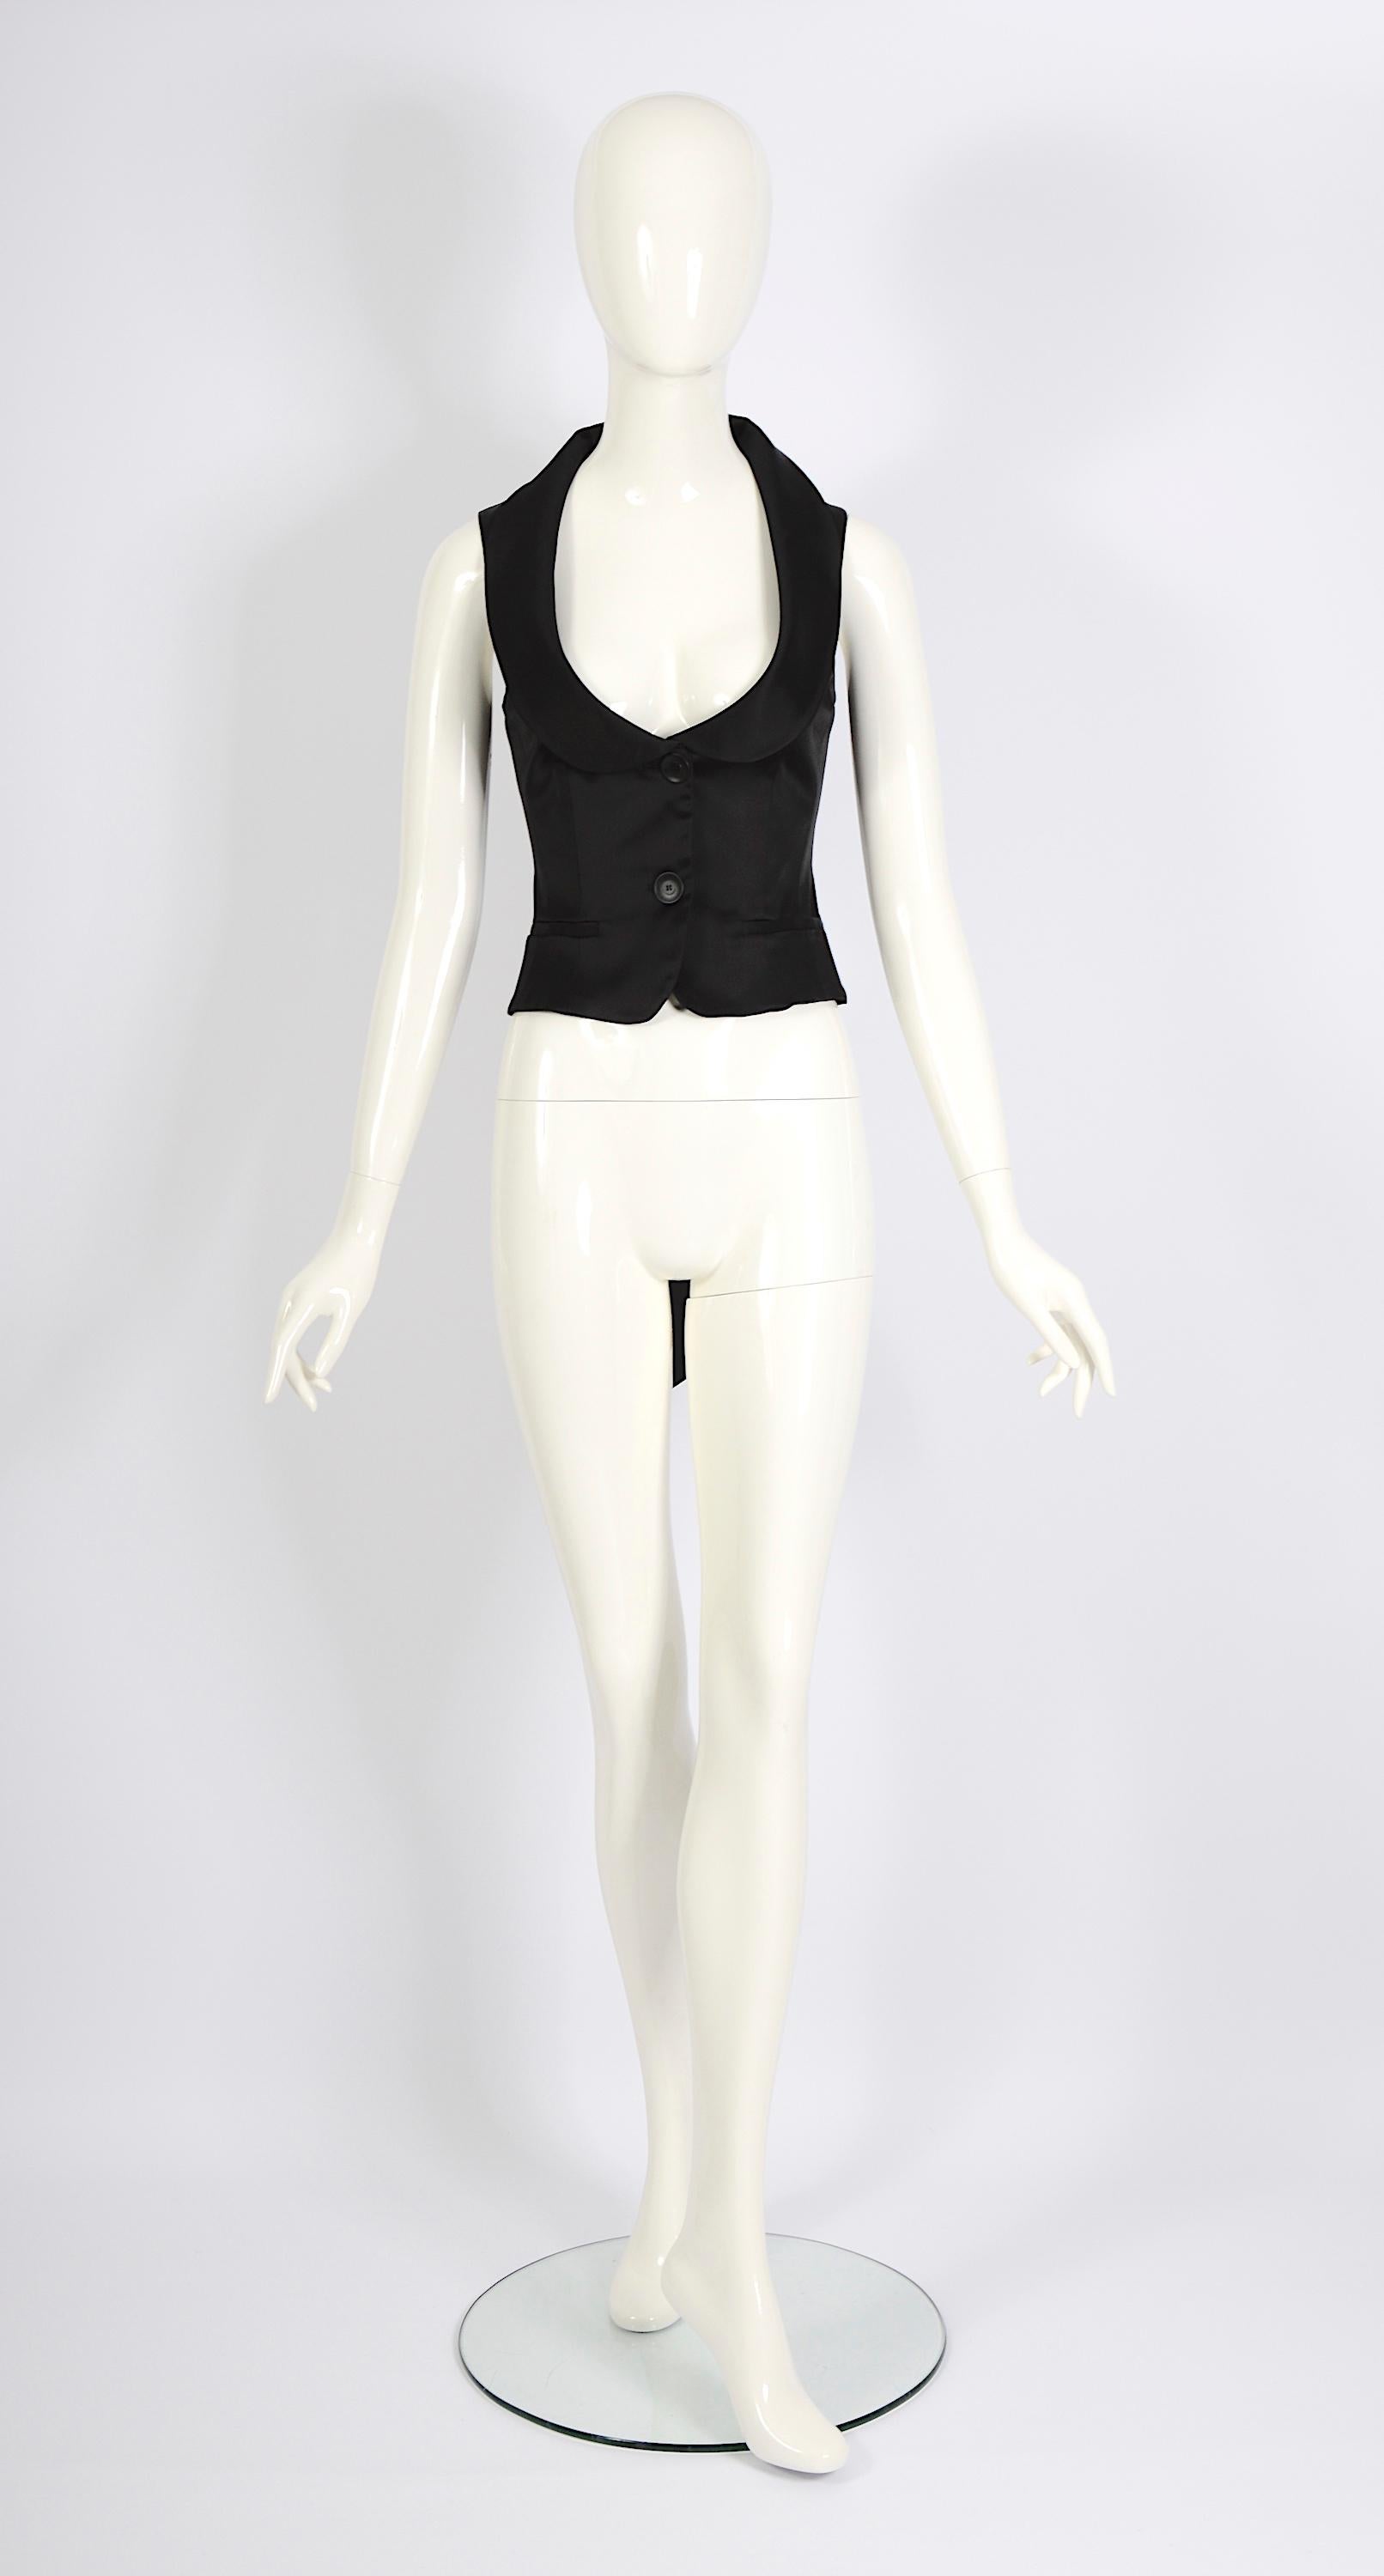 Upgrade your wardrobe with this stunning vintage 90s Valentino piece. This sleeveless black waistcoat 
vest top is simple yet stylish, featuring an open back tied with delicate silk ribbons. Add a touch of elegance to your look with this timeless